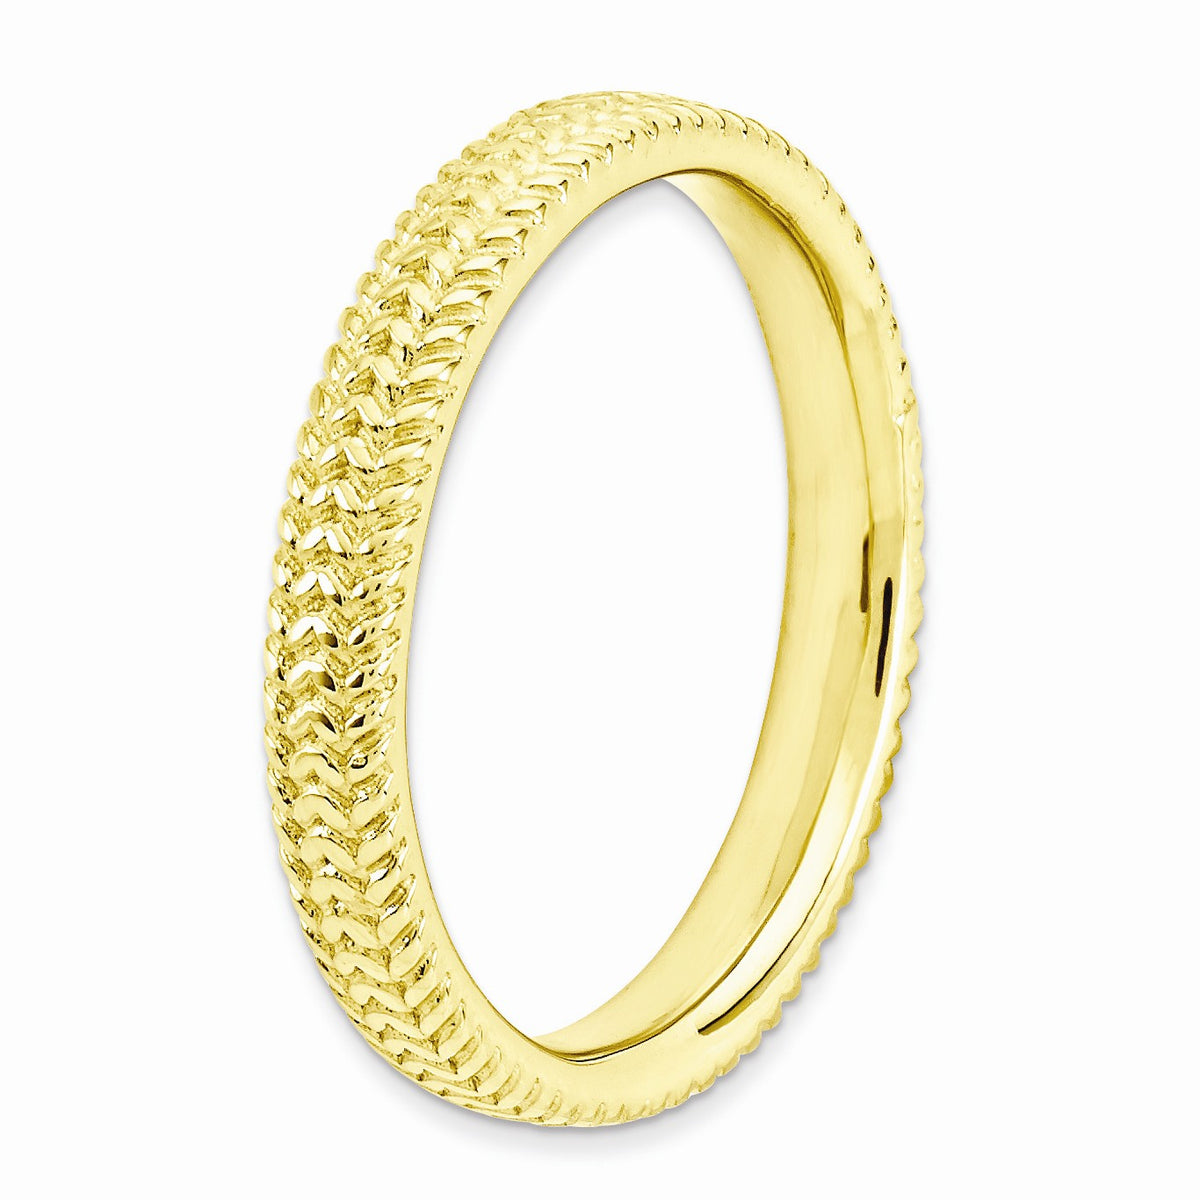 Alternate view of the 3.25mm 14k Yellow Gold Plated Sterling Silver Stackable Band by The Black Bow Jewelry Co.